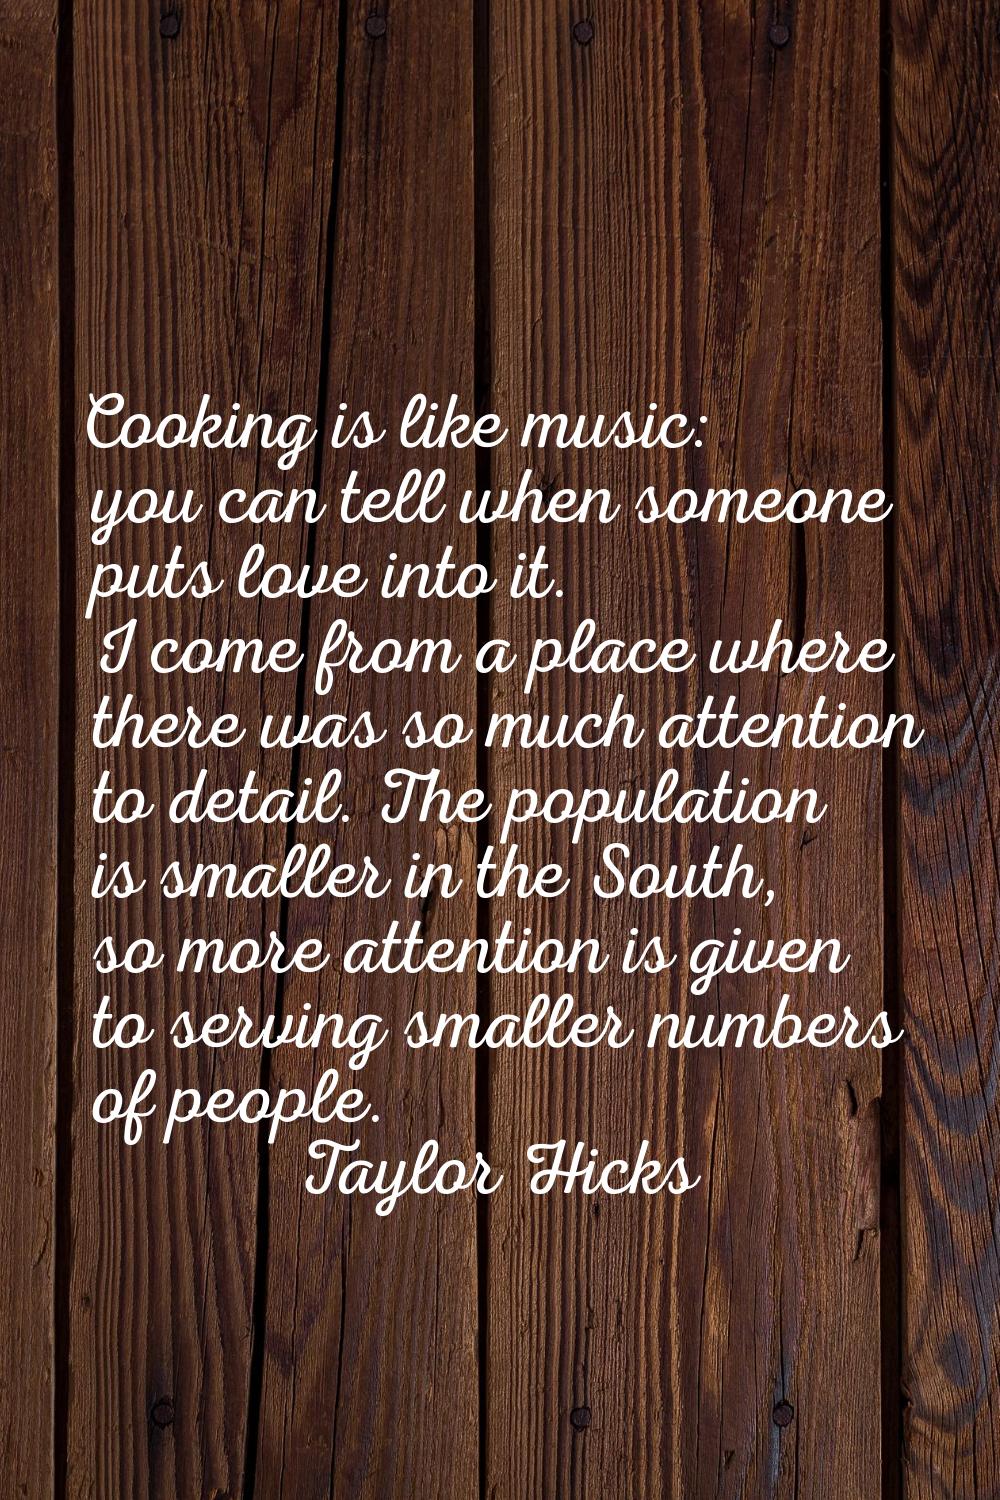 Cooking is like music: you can tell when someone puts love into it. I come from a place where there